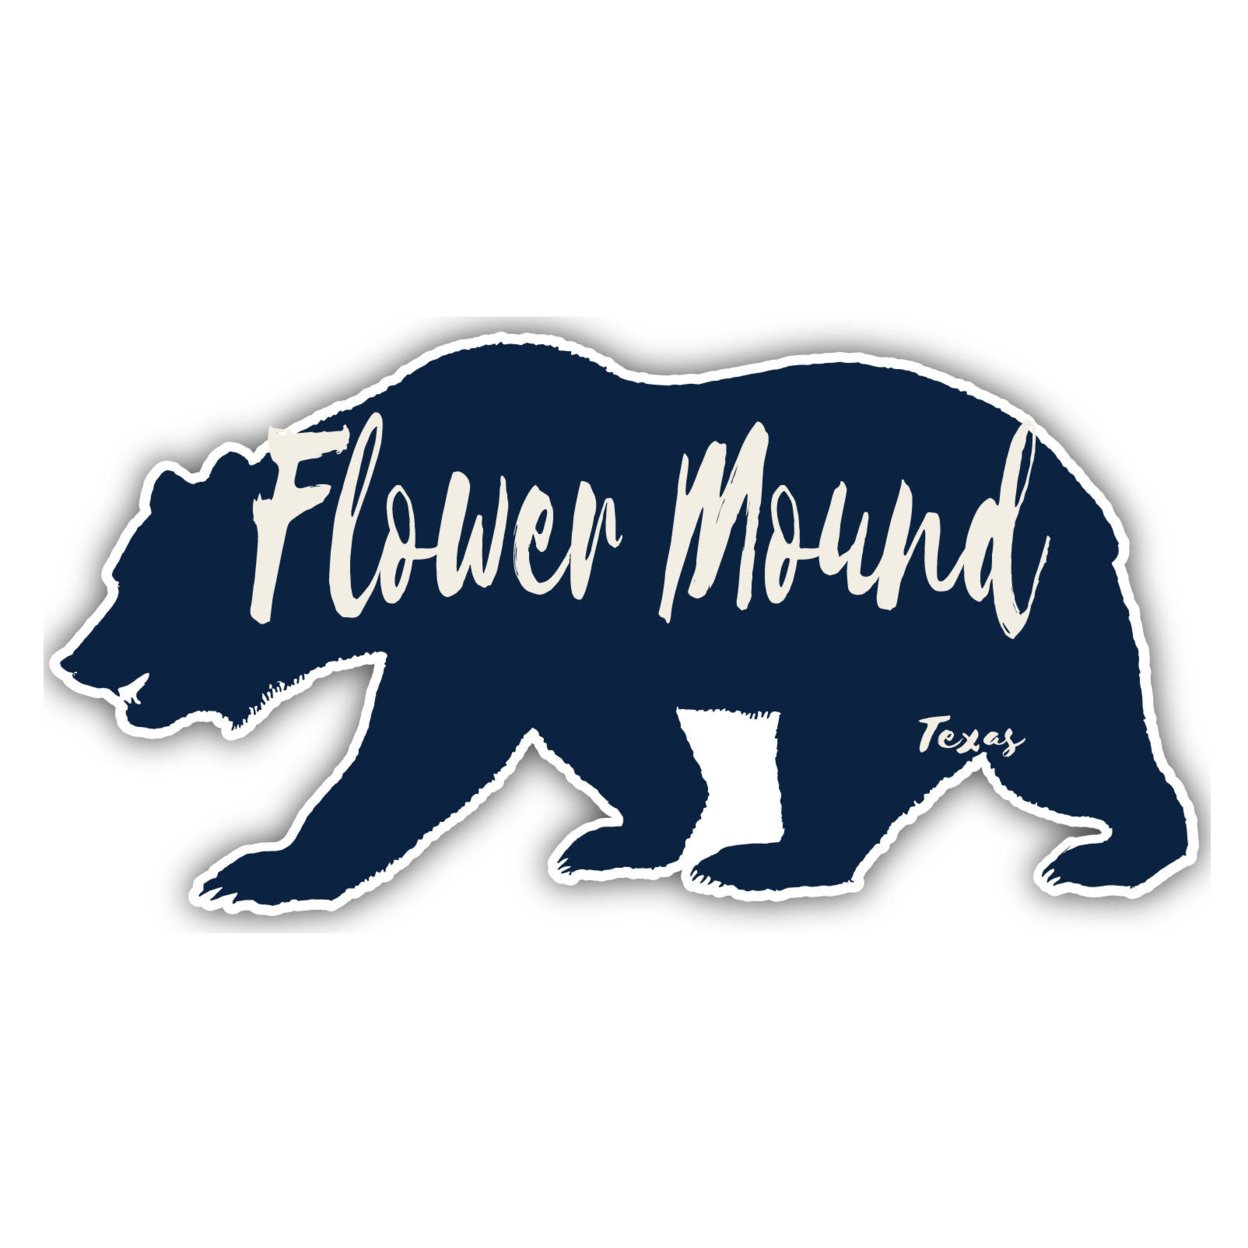 Flower Mound Texas Souvenir Decorative Stickers (Choose Theme And Size) - 4-Pack, 10-Inch, Camp Life